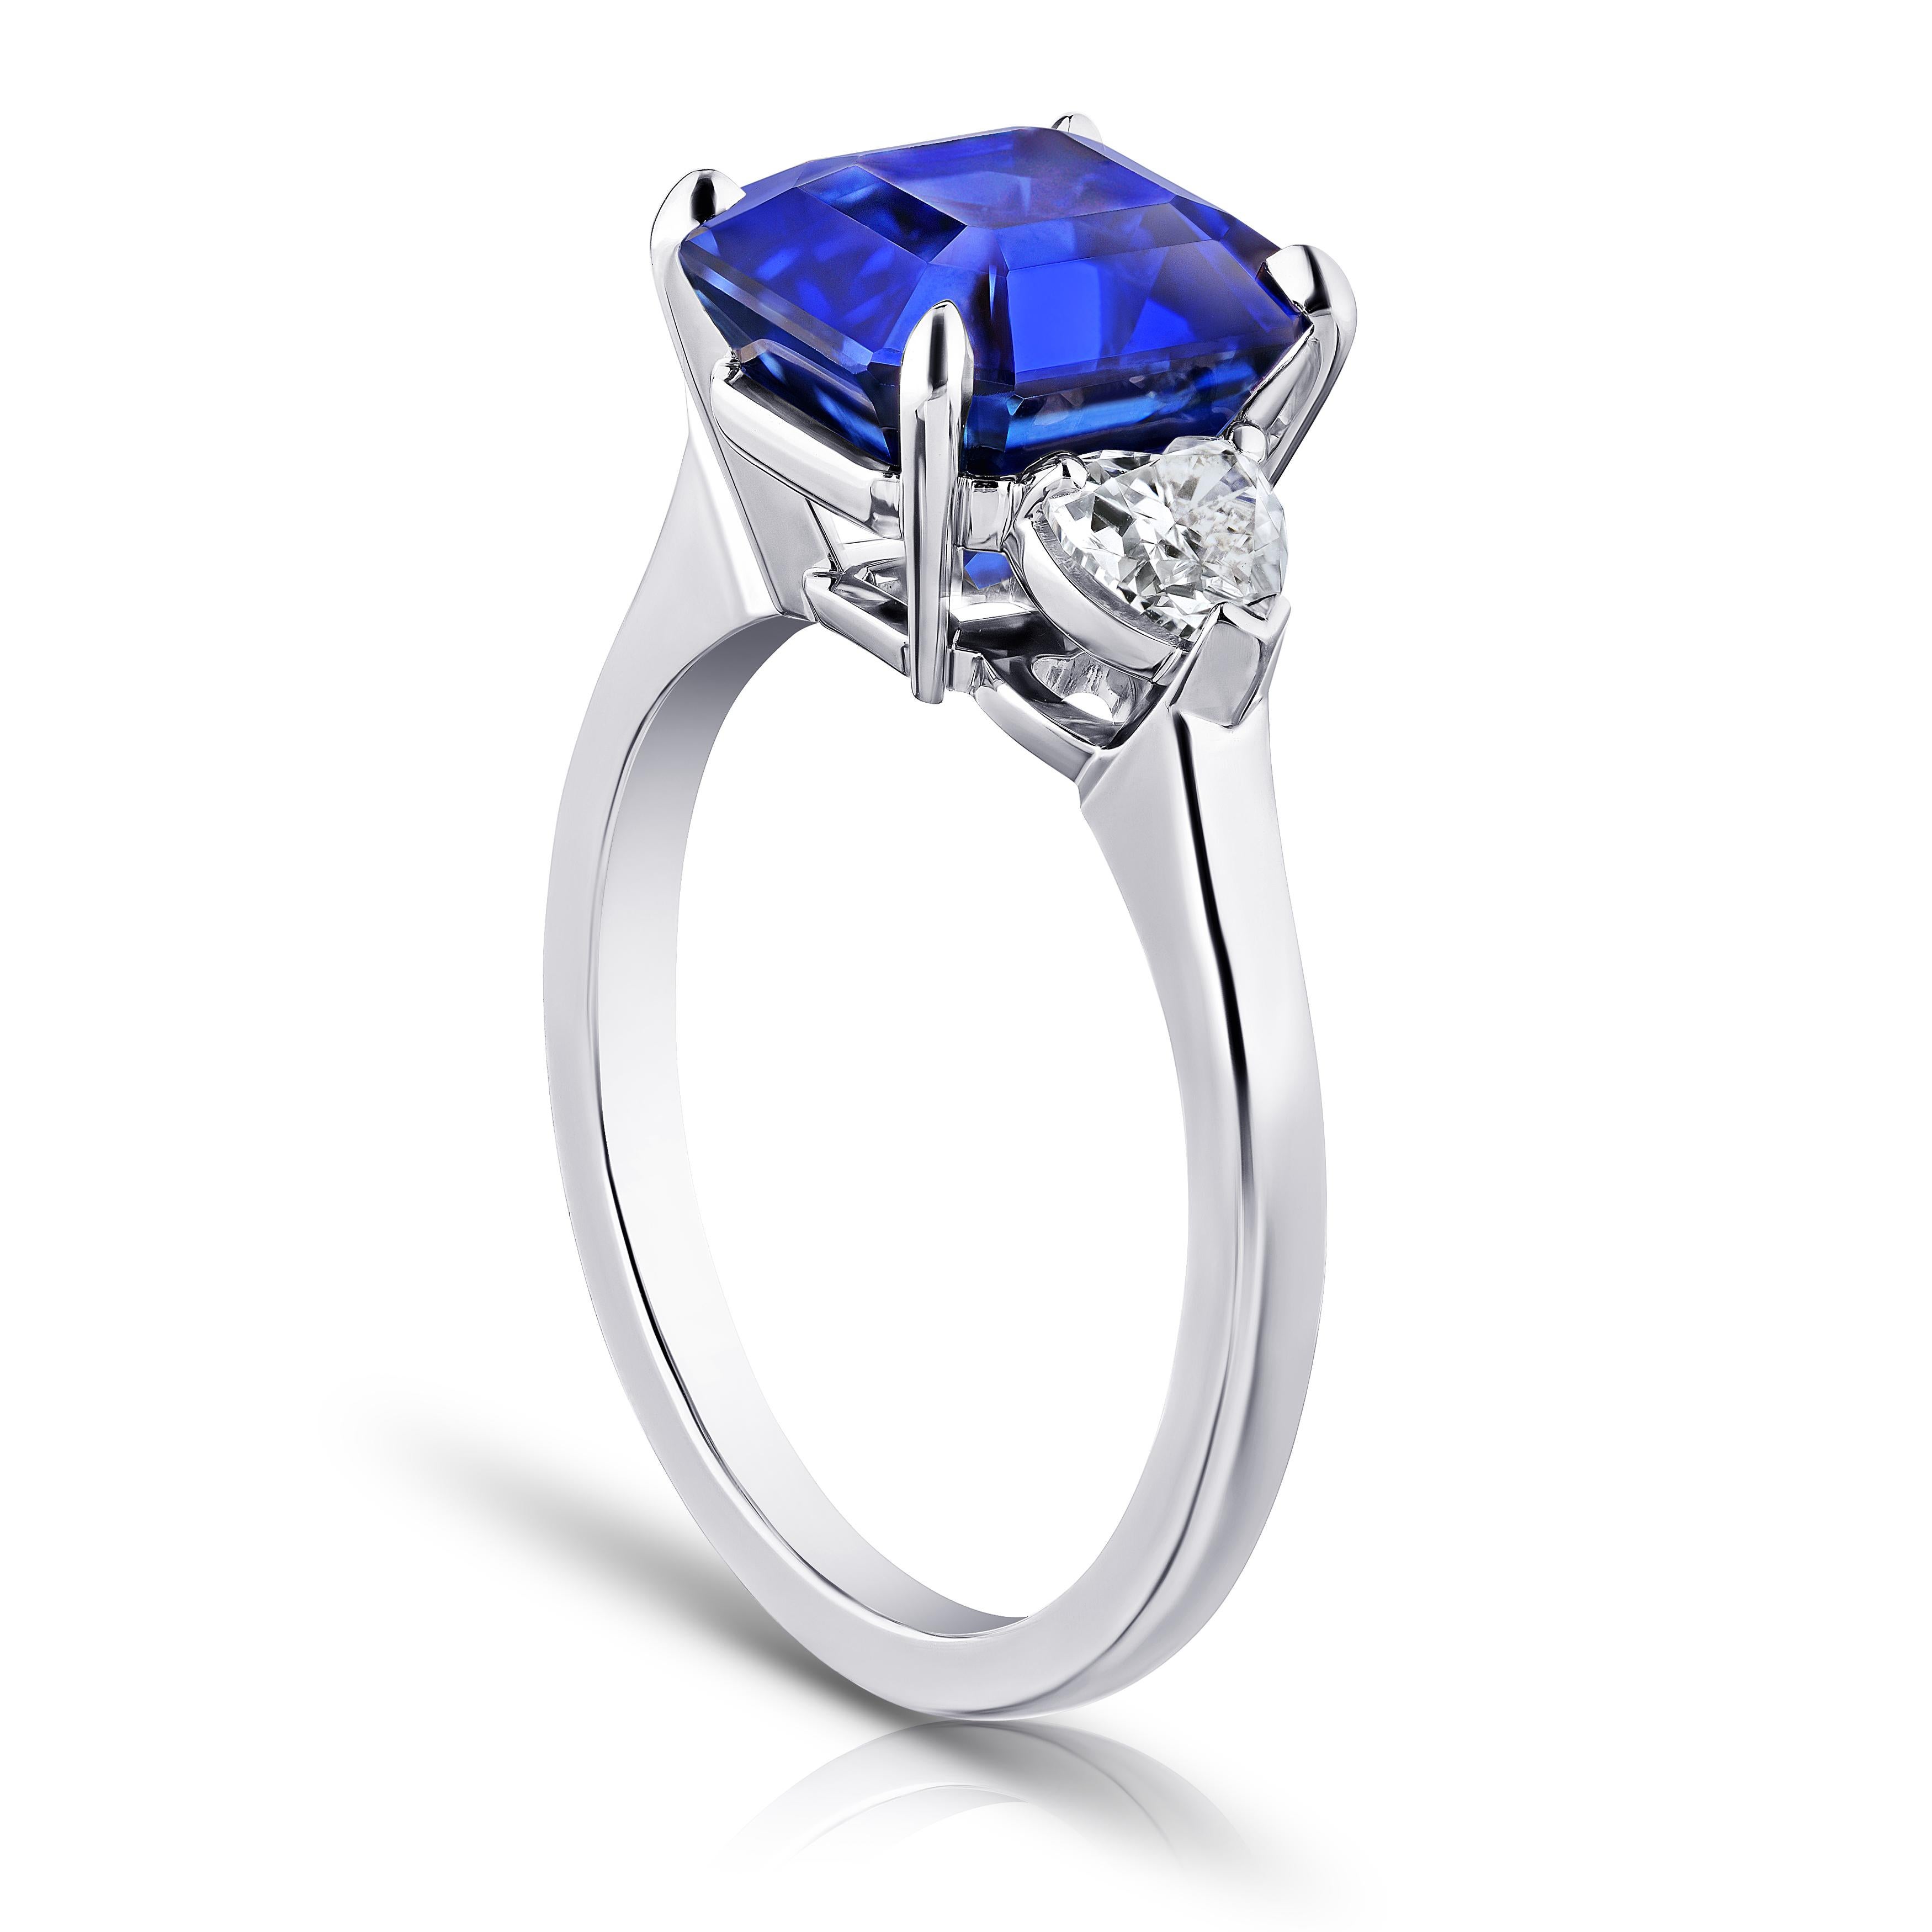 5.65 carat square emerald blue sapphire with heart shape diamonds .58 carats set in a platinum ring Size 7.
